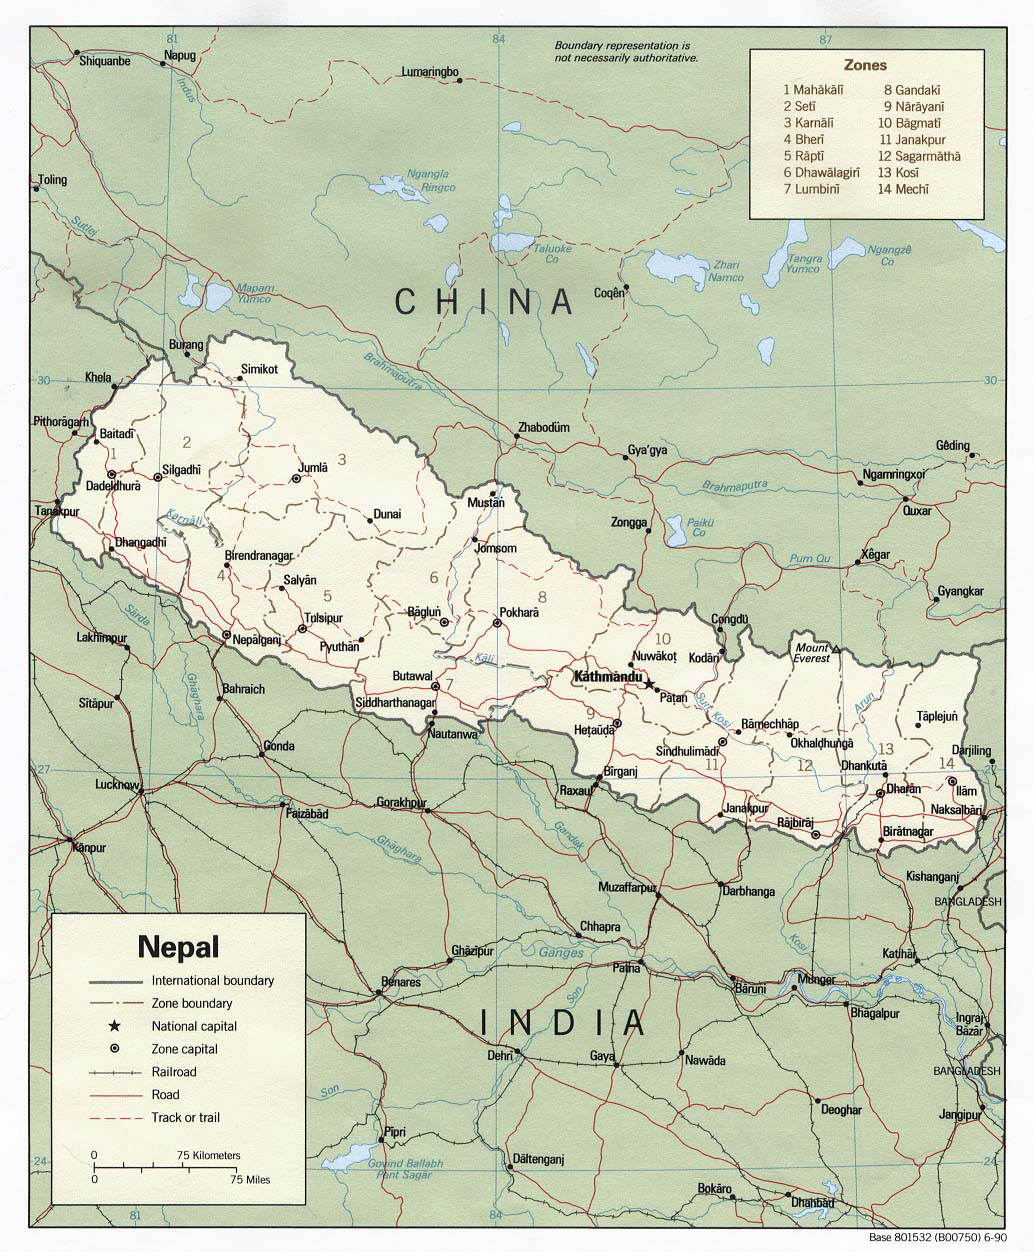 Detailed political and administrative map of Nepal. Nepal detailed